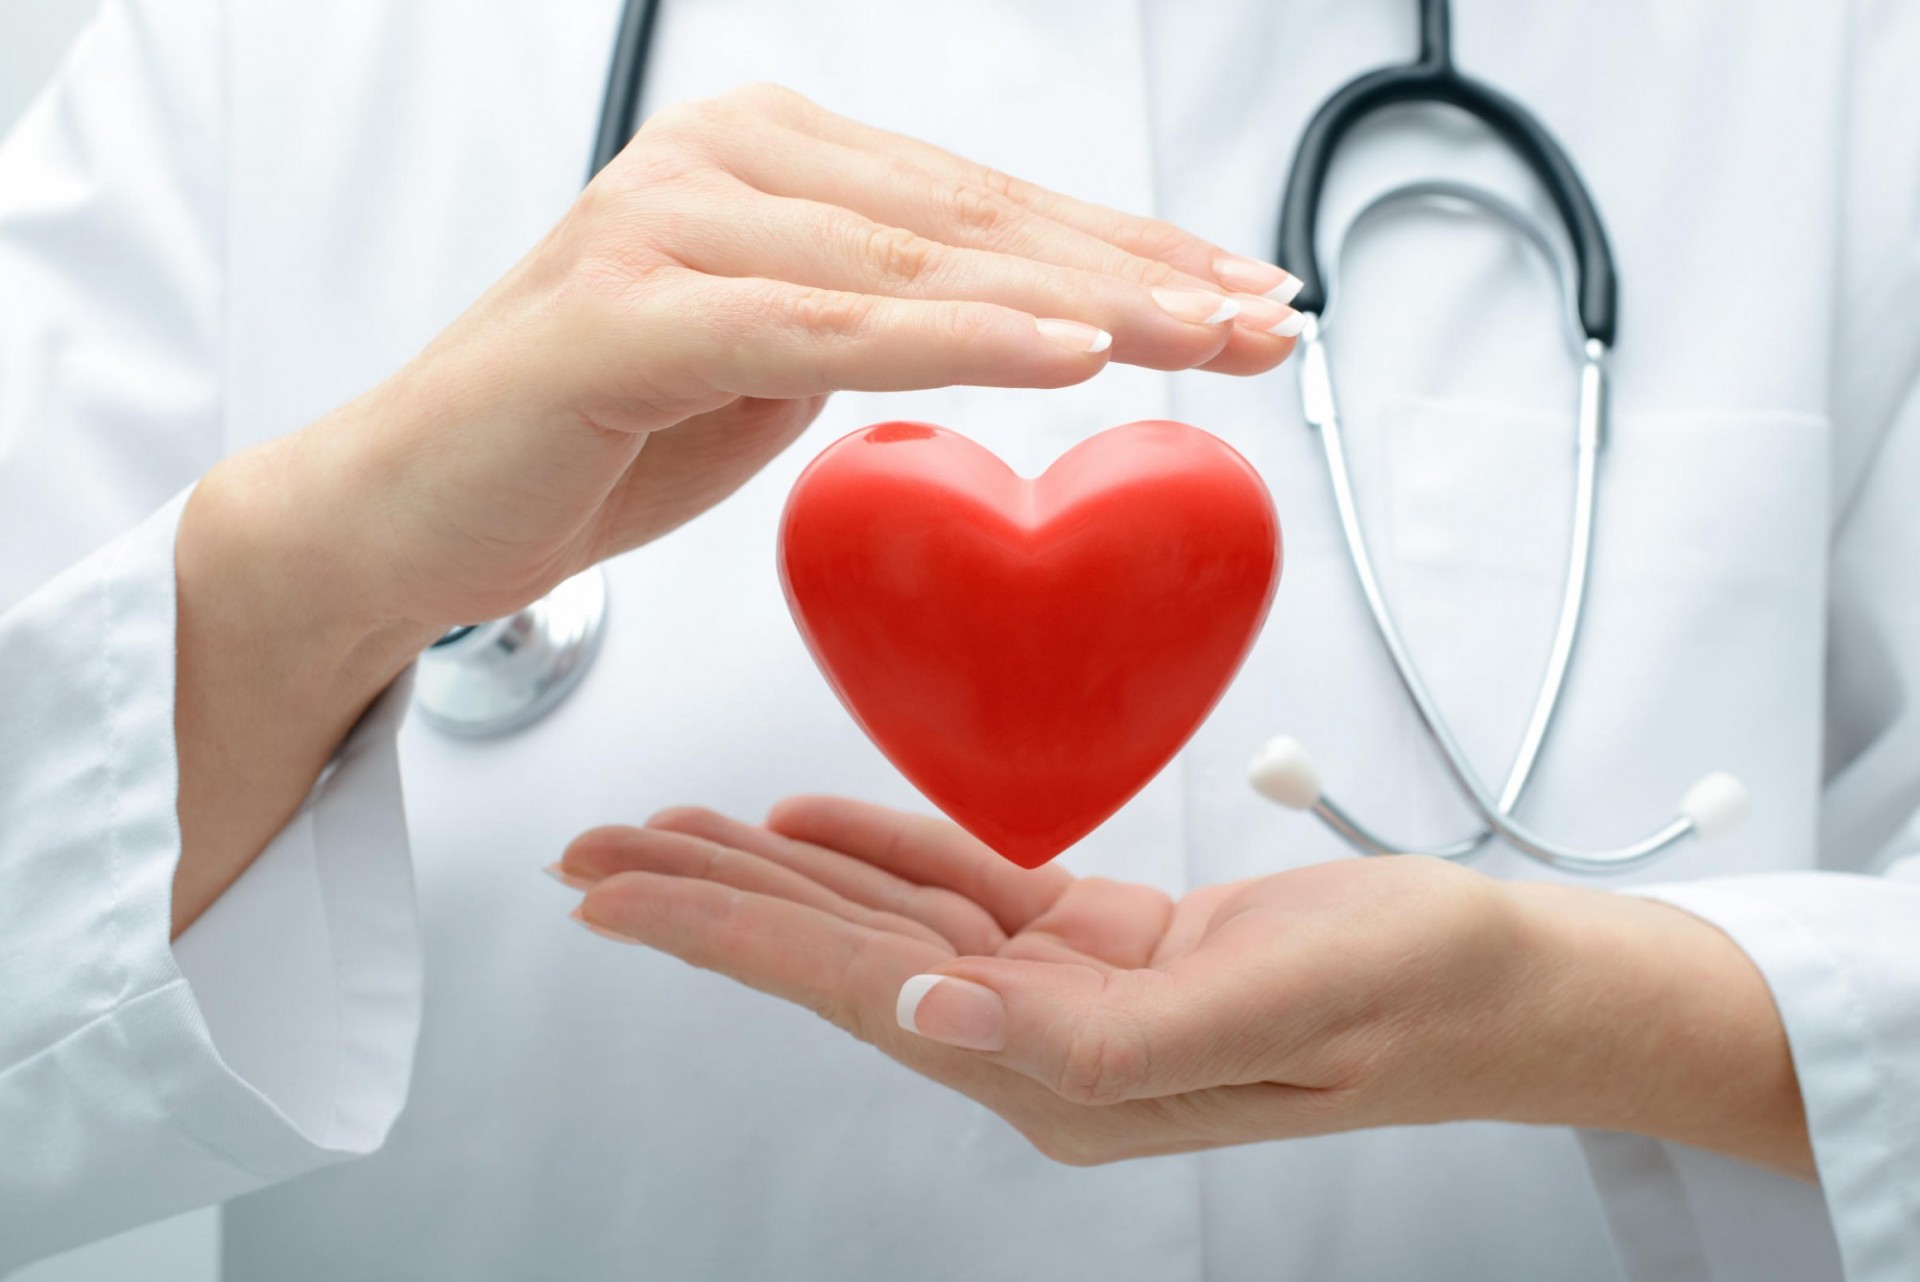 Caring for the Heart: Women's Health during COVID-19